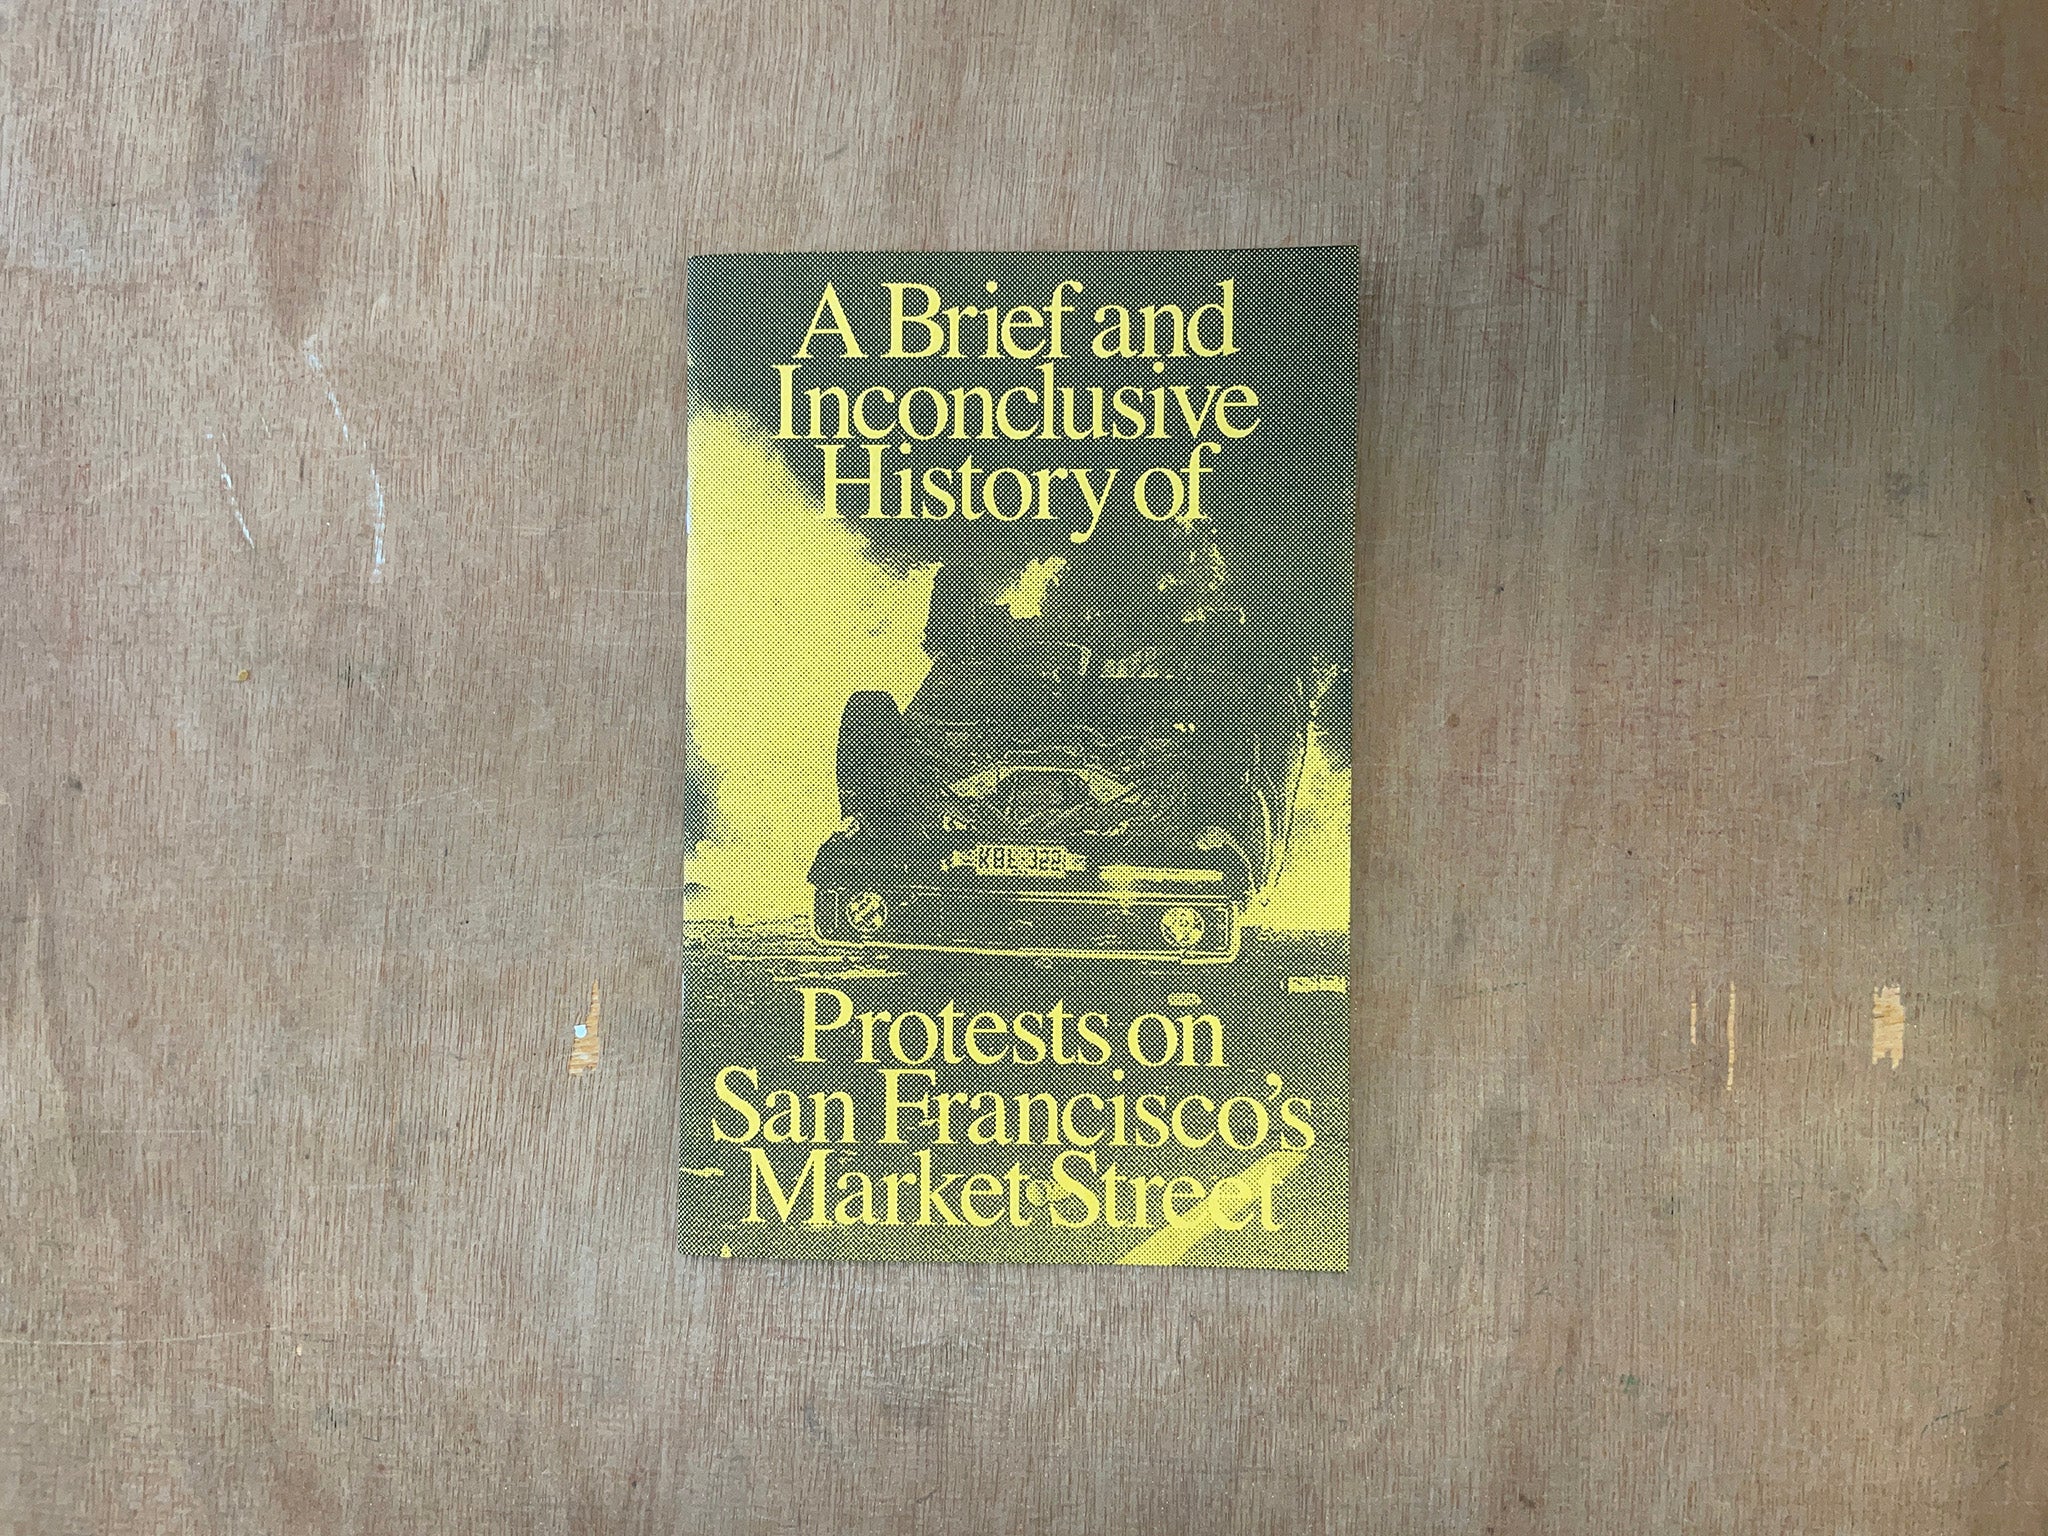 A BRIEF AND INCONCLUSIVE HISTORY OF PROTESTS ON SAN FRANCISCO’S MARKET STREET by Jessalyn Aaland